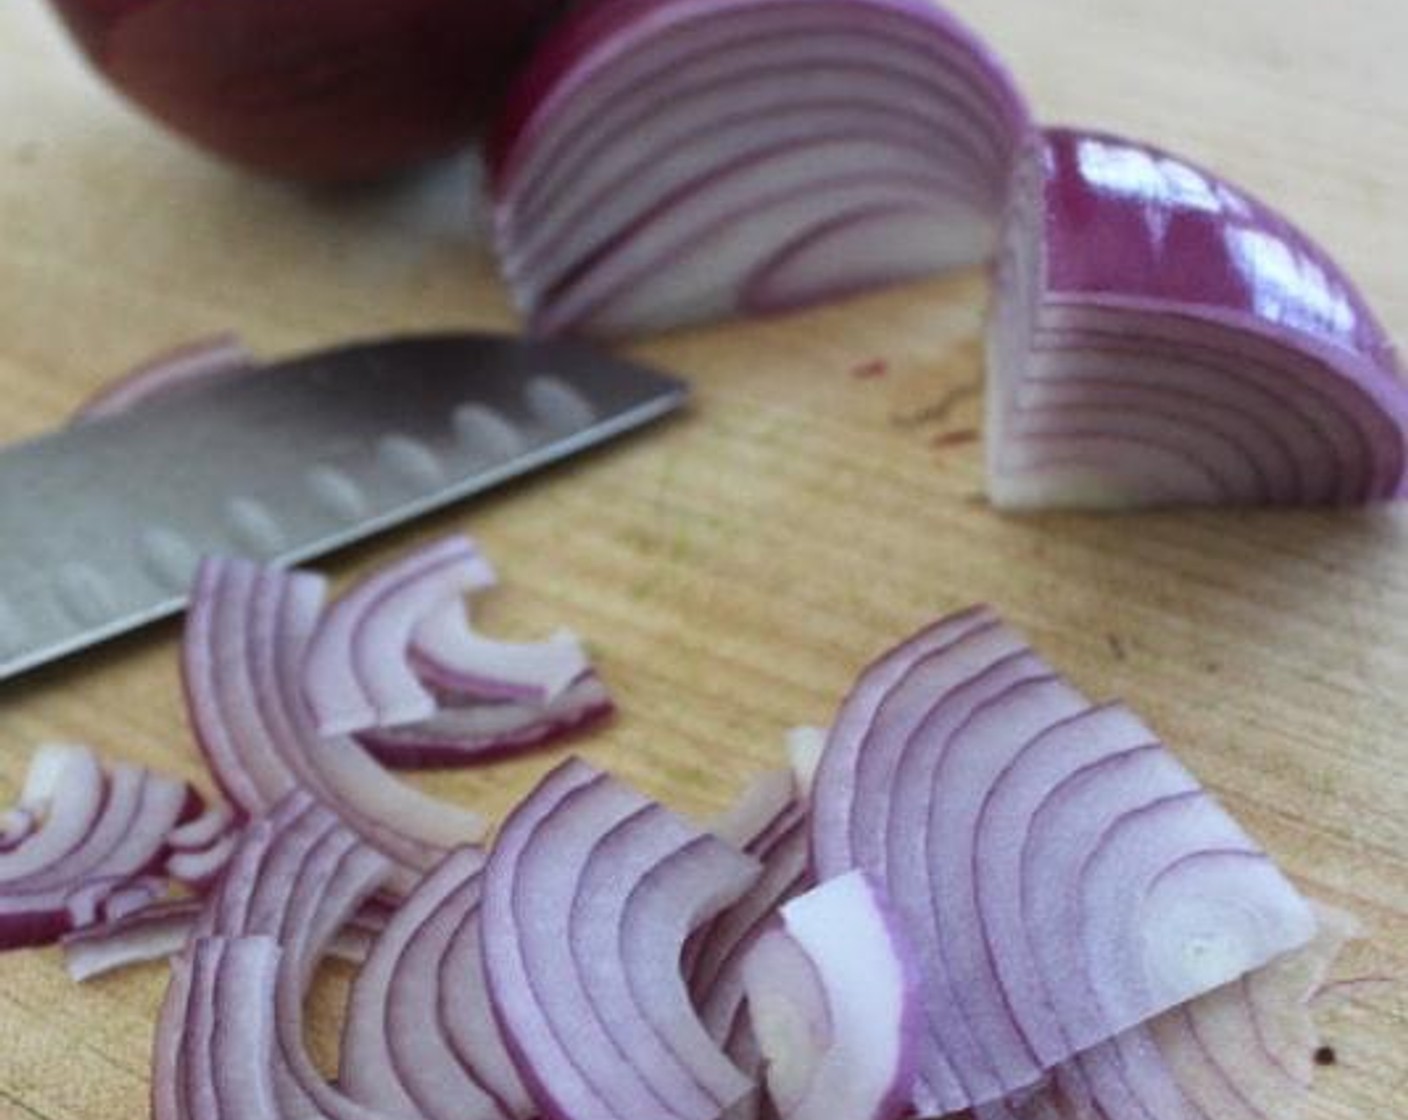 step 6 Place the Red Onion (3/4 cup) in a mesh strainer or colander and rinse under warm tap water for 30 seconds to remove some of their “bite.” Drain and set aside.